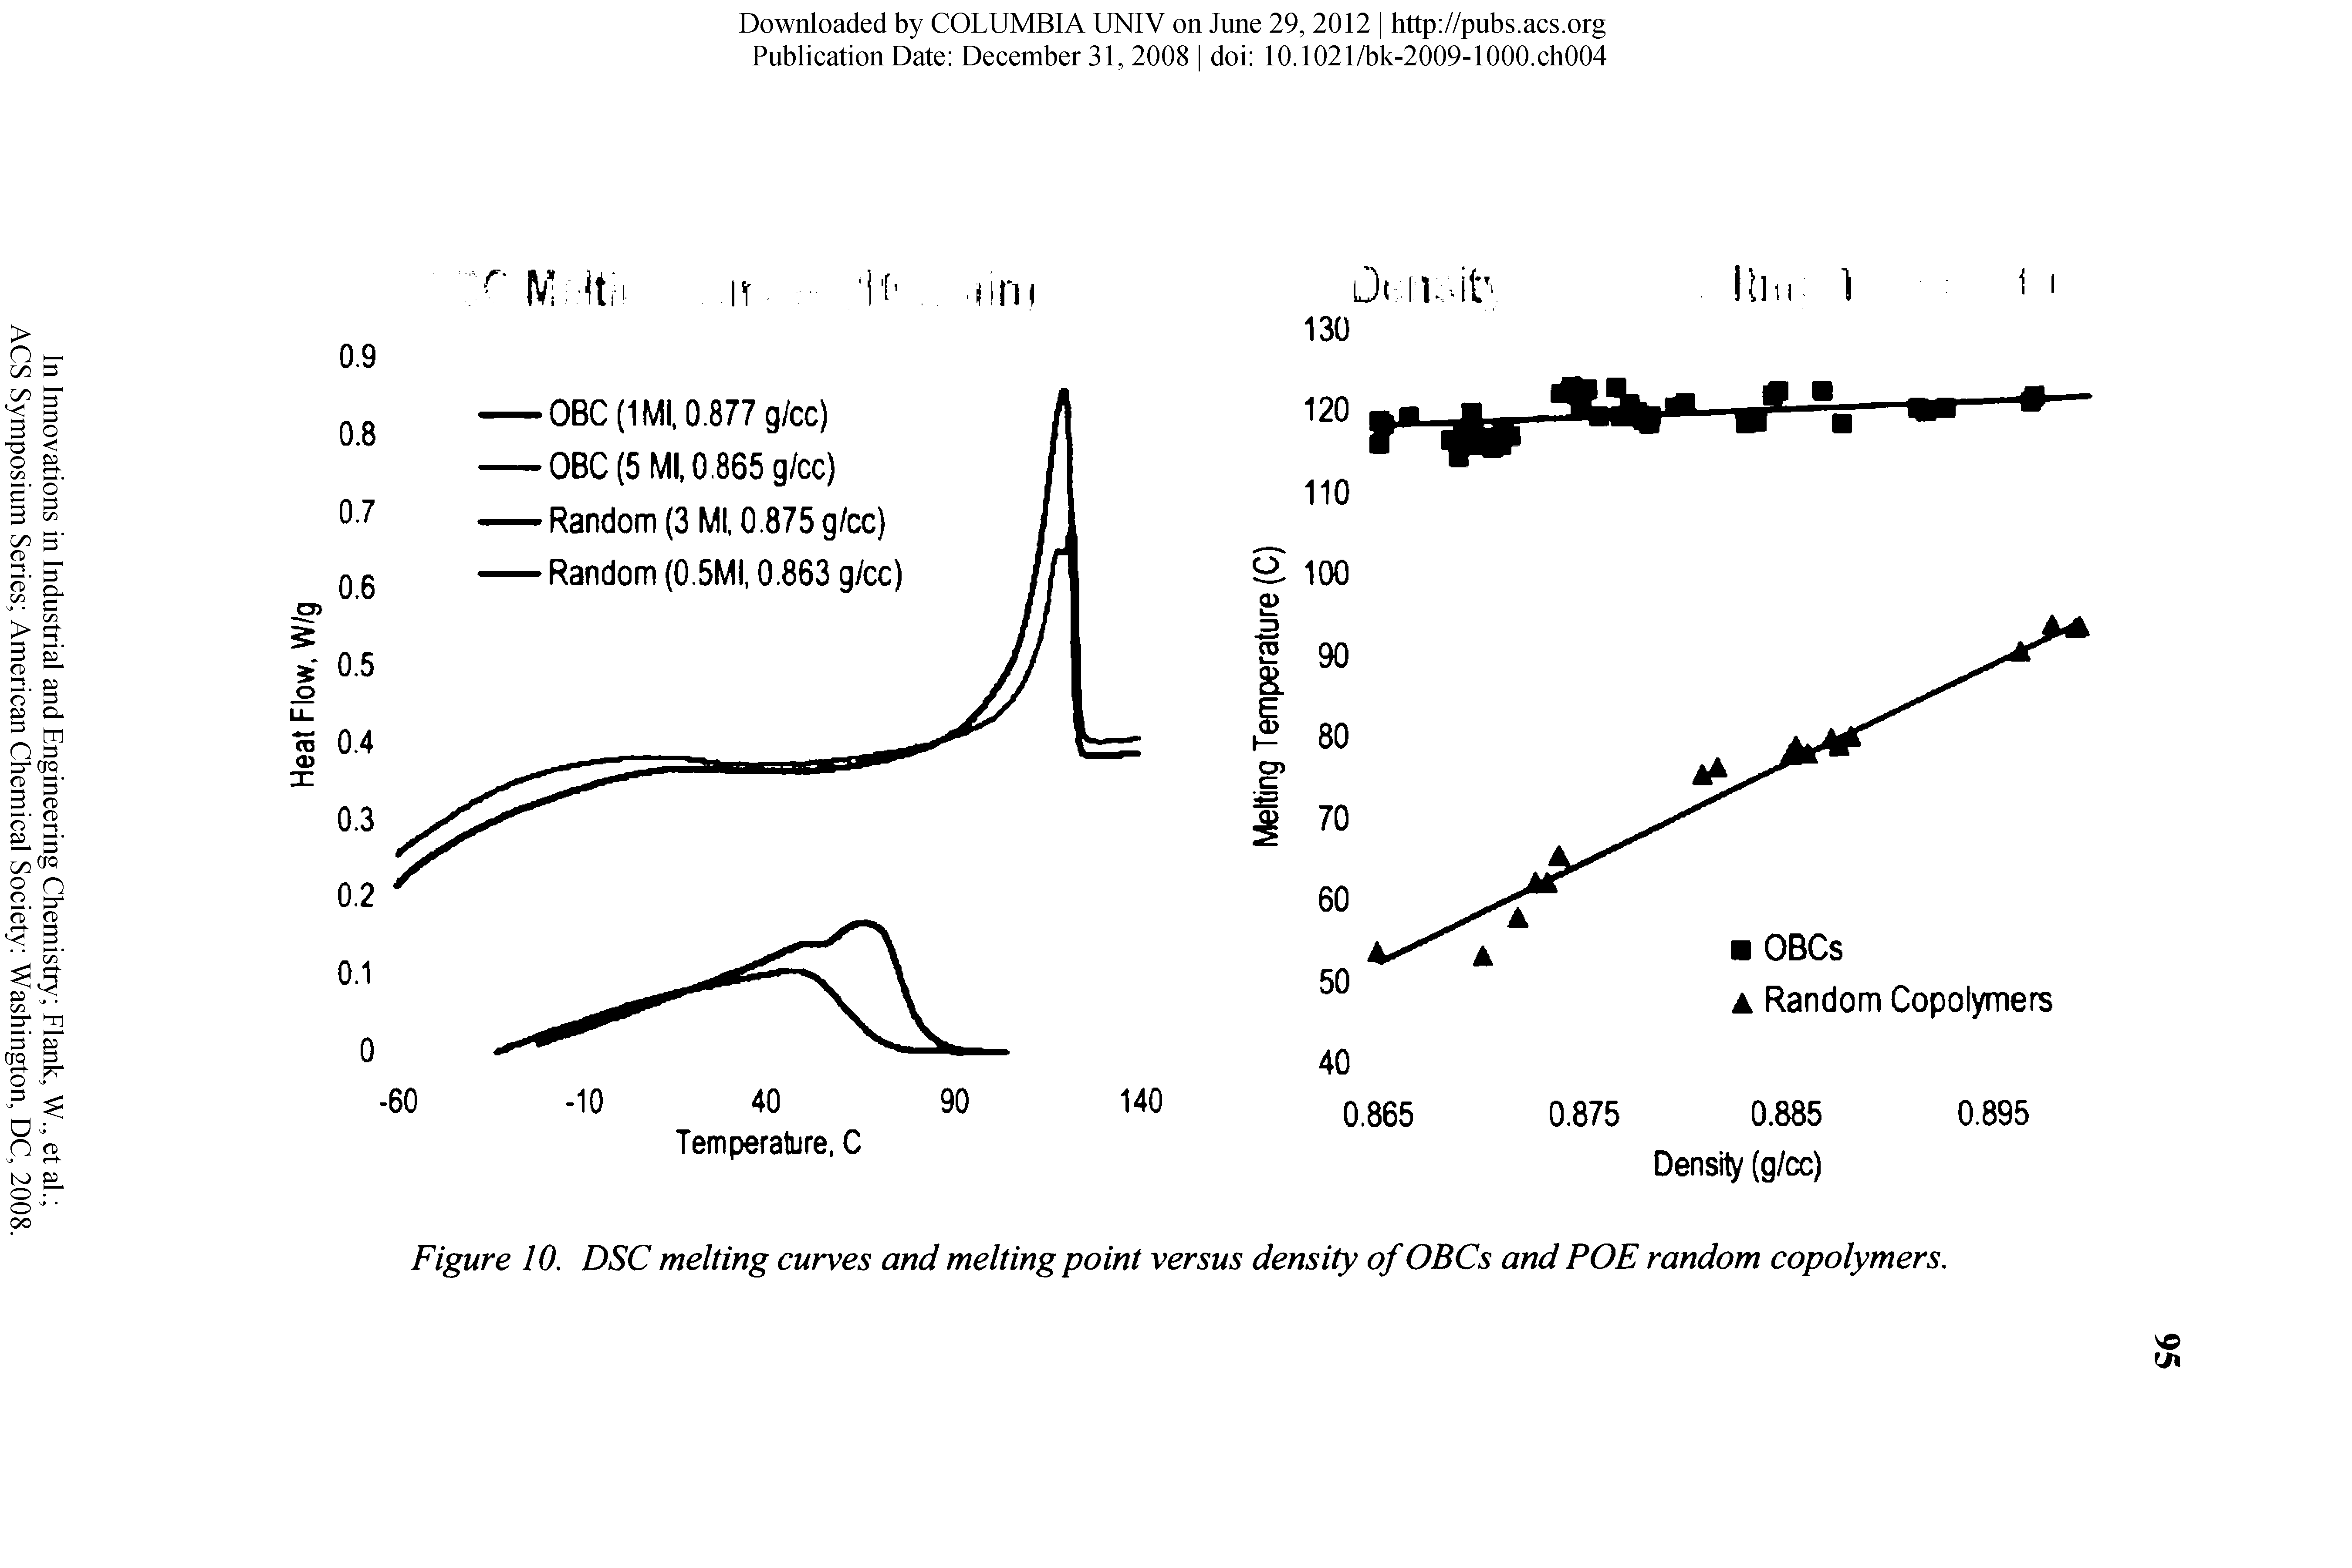 Figure 10. DSC melting curves and melting point versus density of OBCs and POE random copolymers.